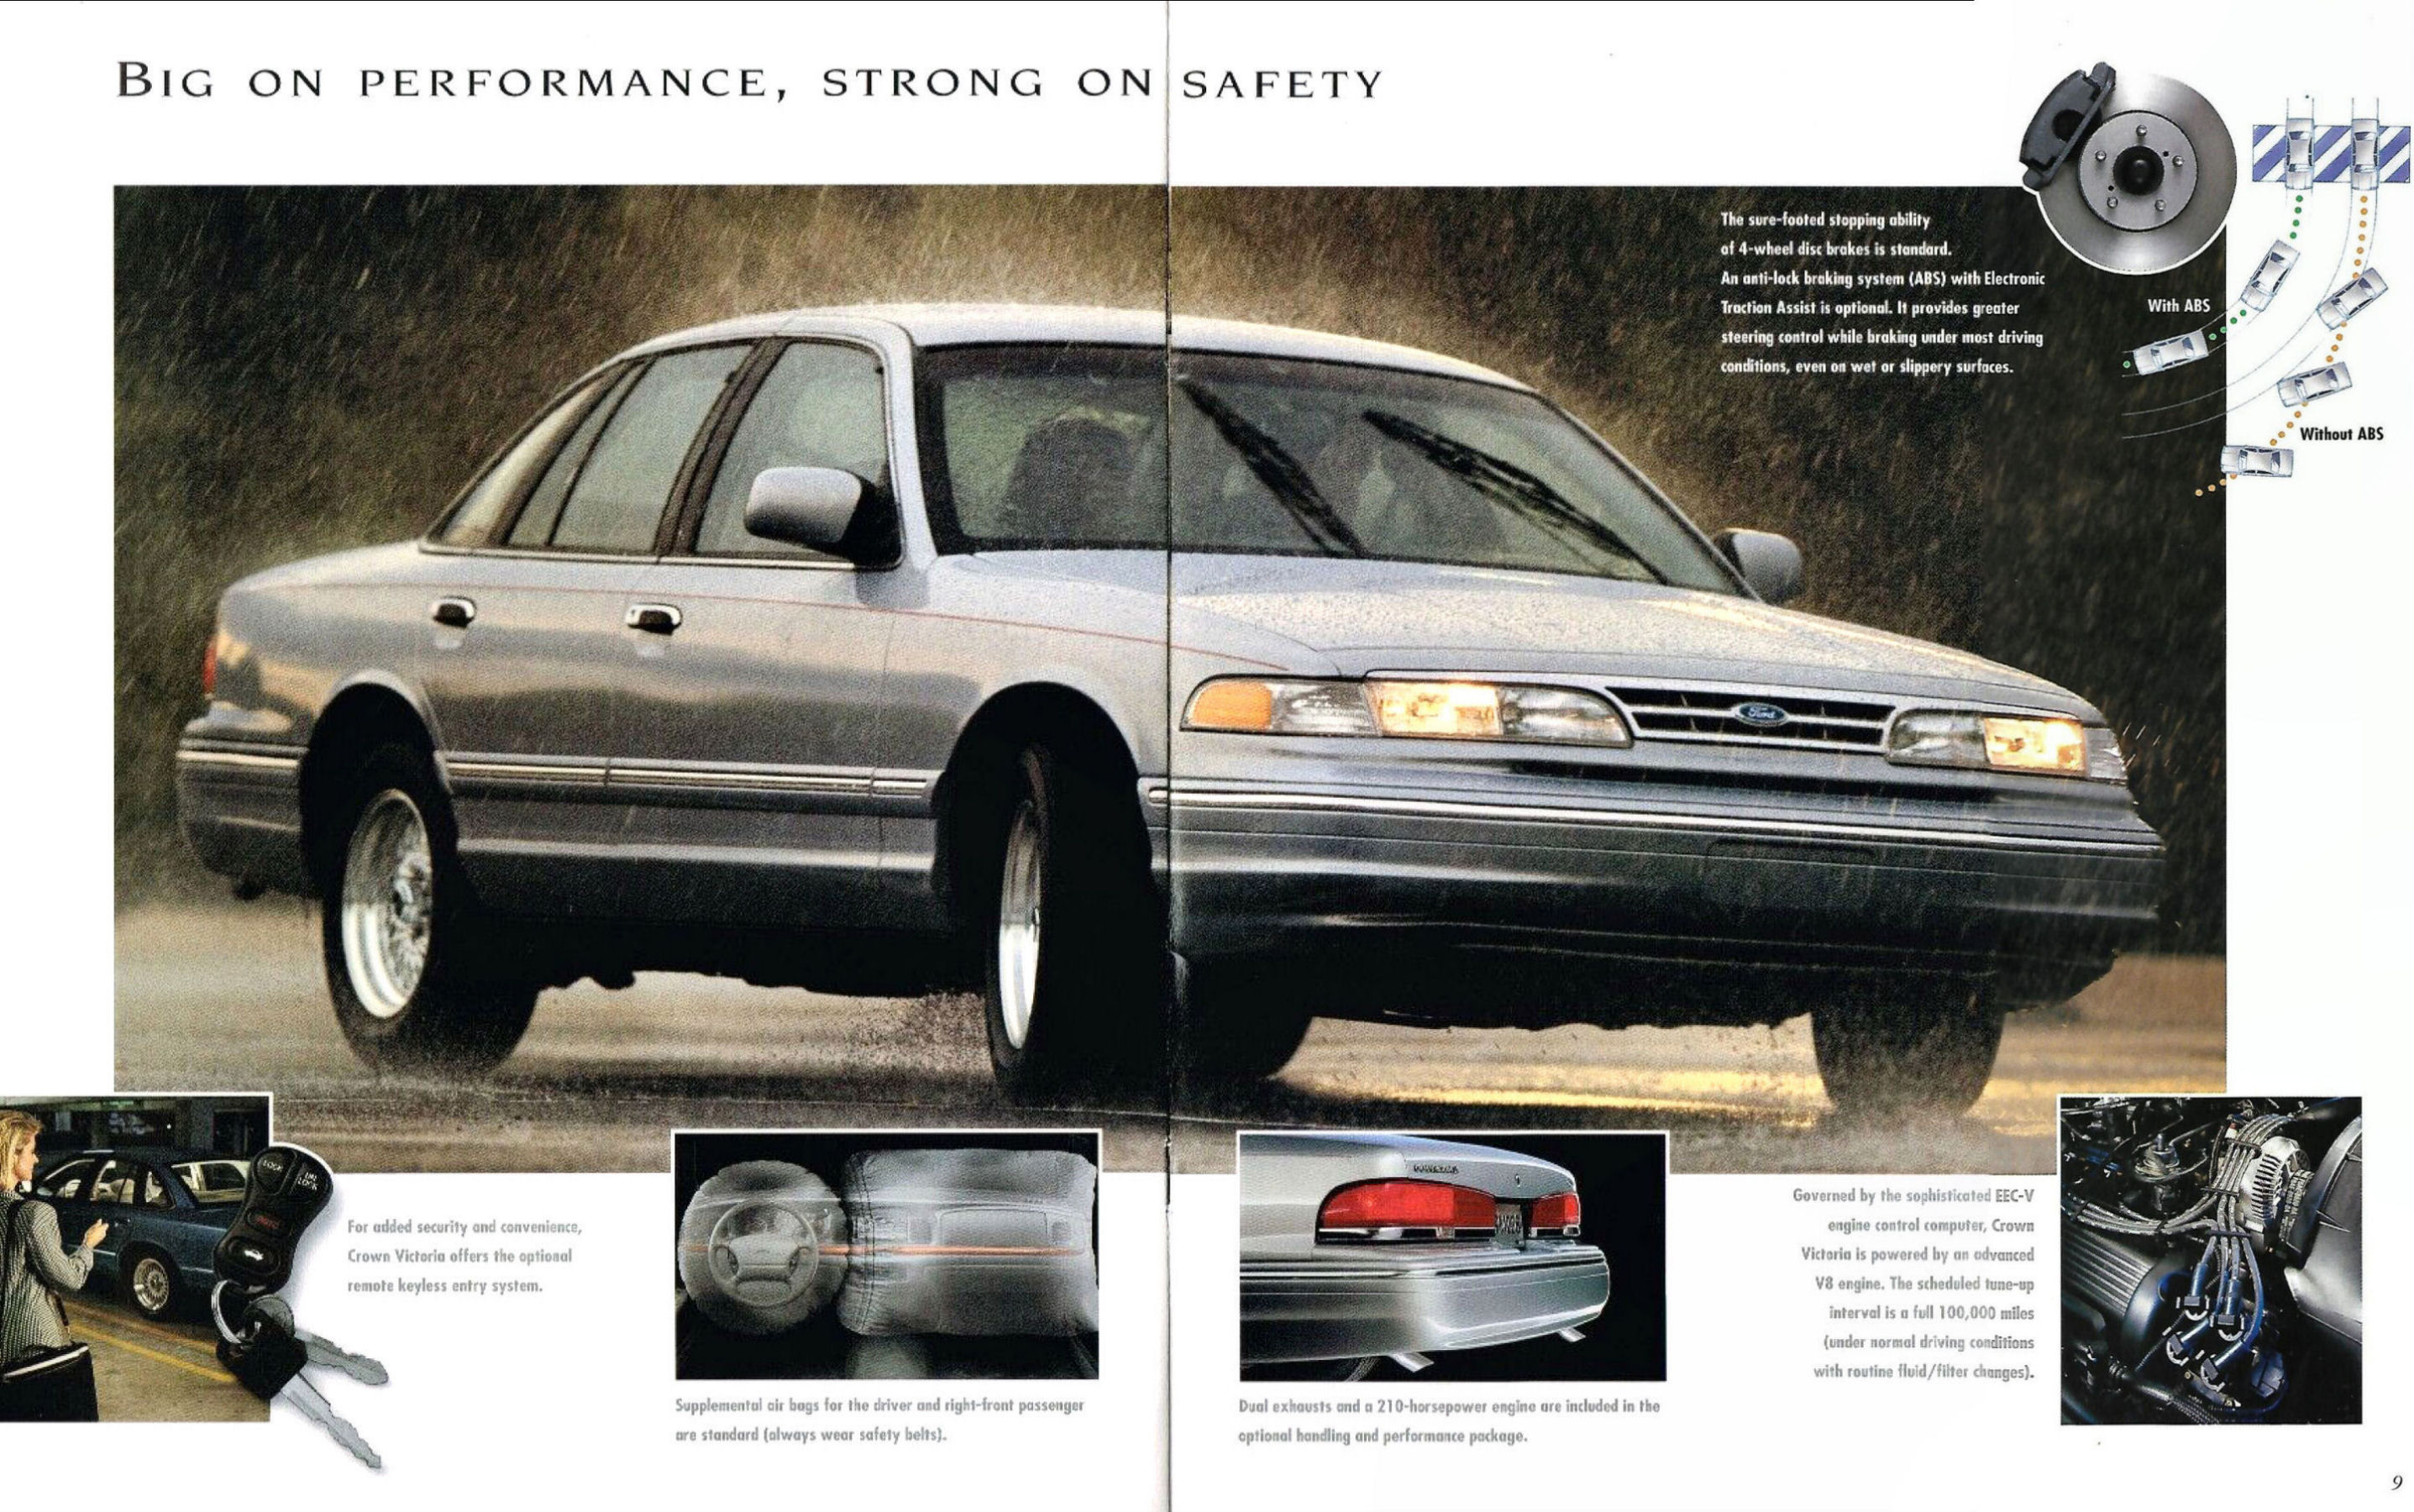 1997 Ford Crown Victoria-08-09